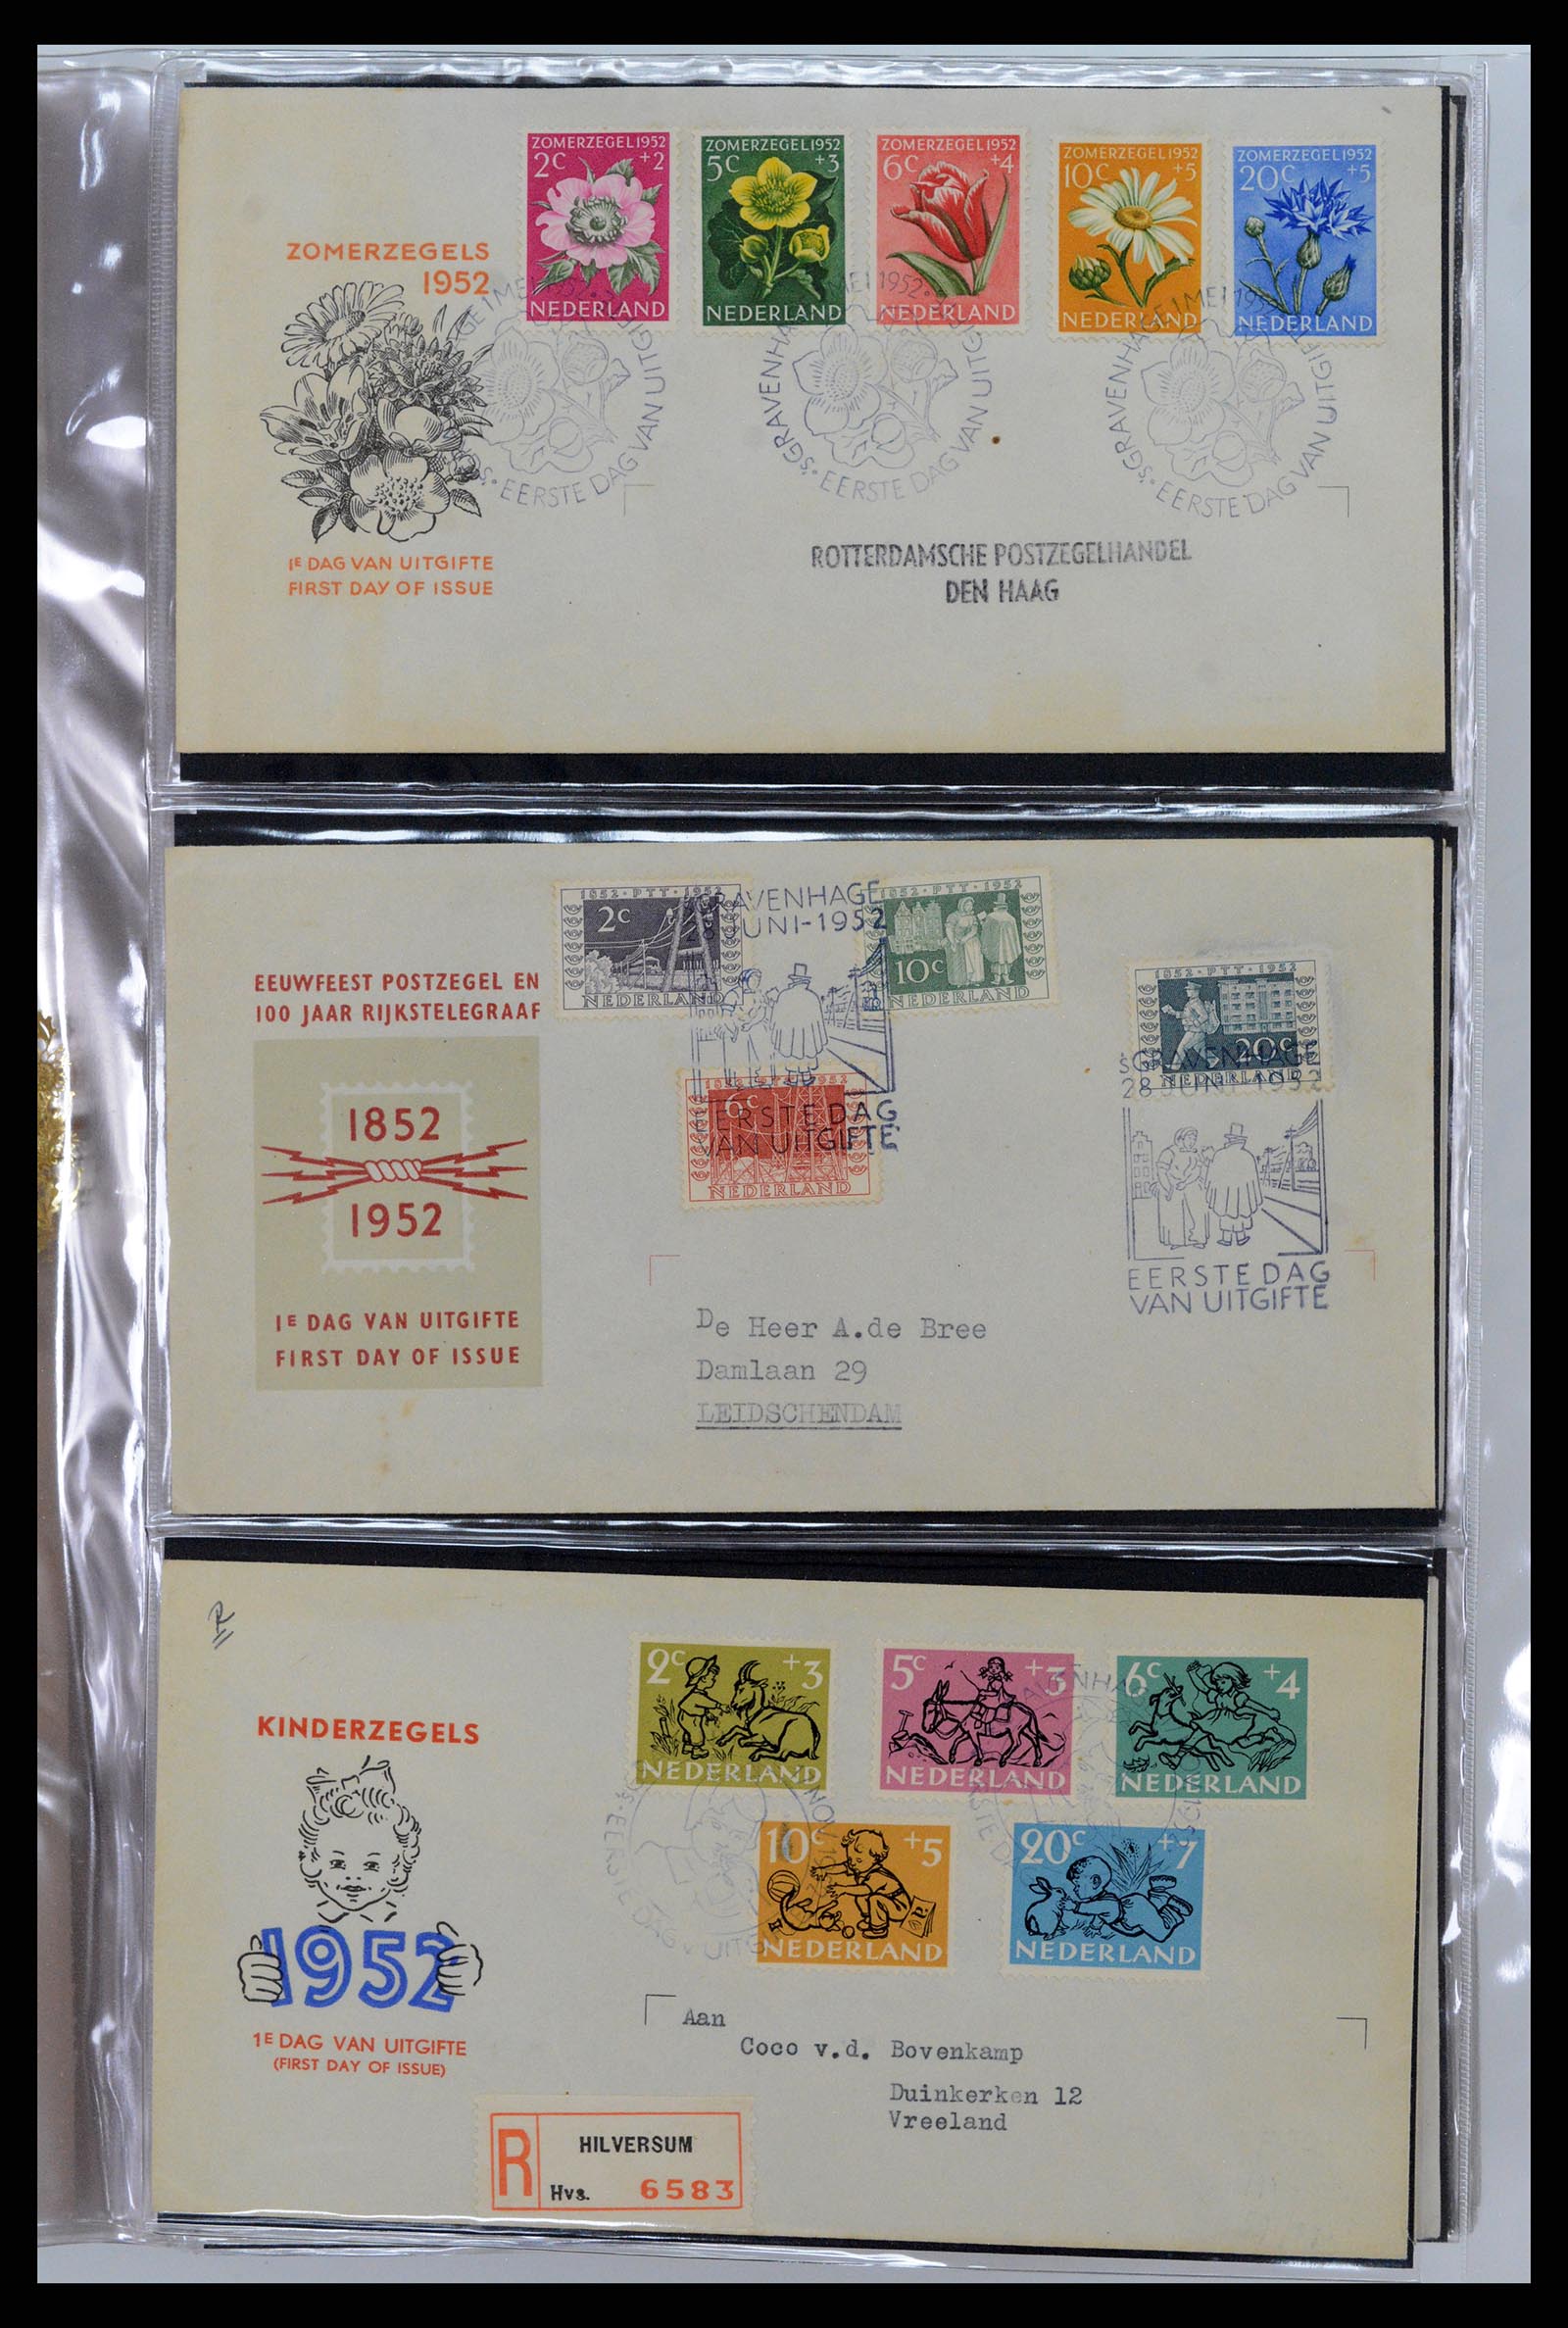 37461 004 - Stamp collection 37461 Netherlands FDC's 1950-2014.